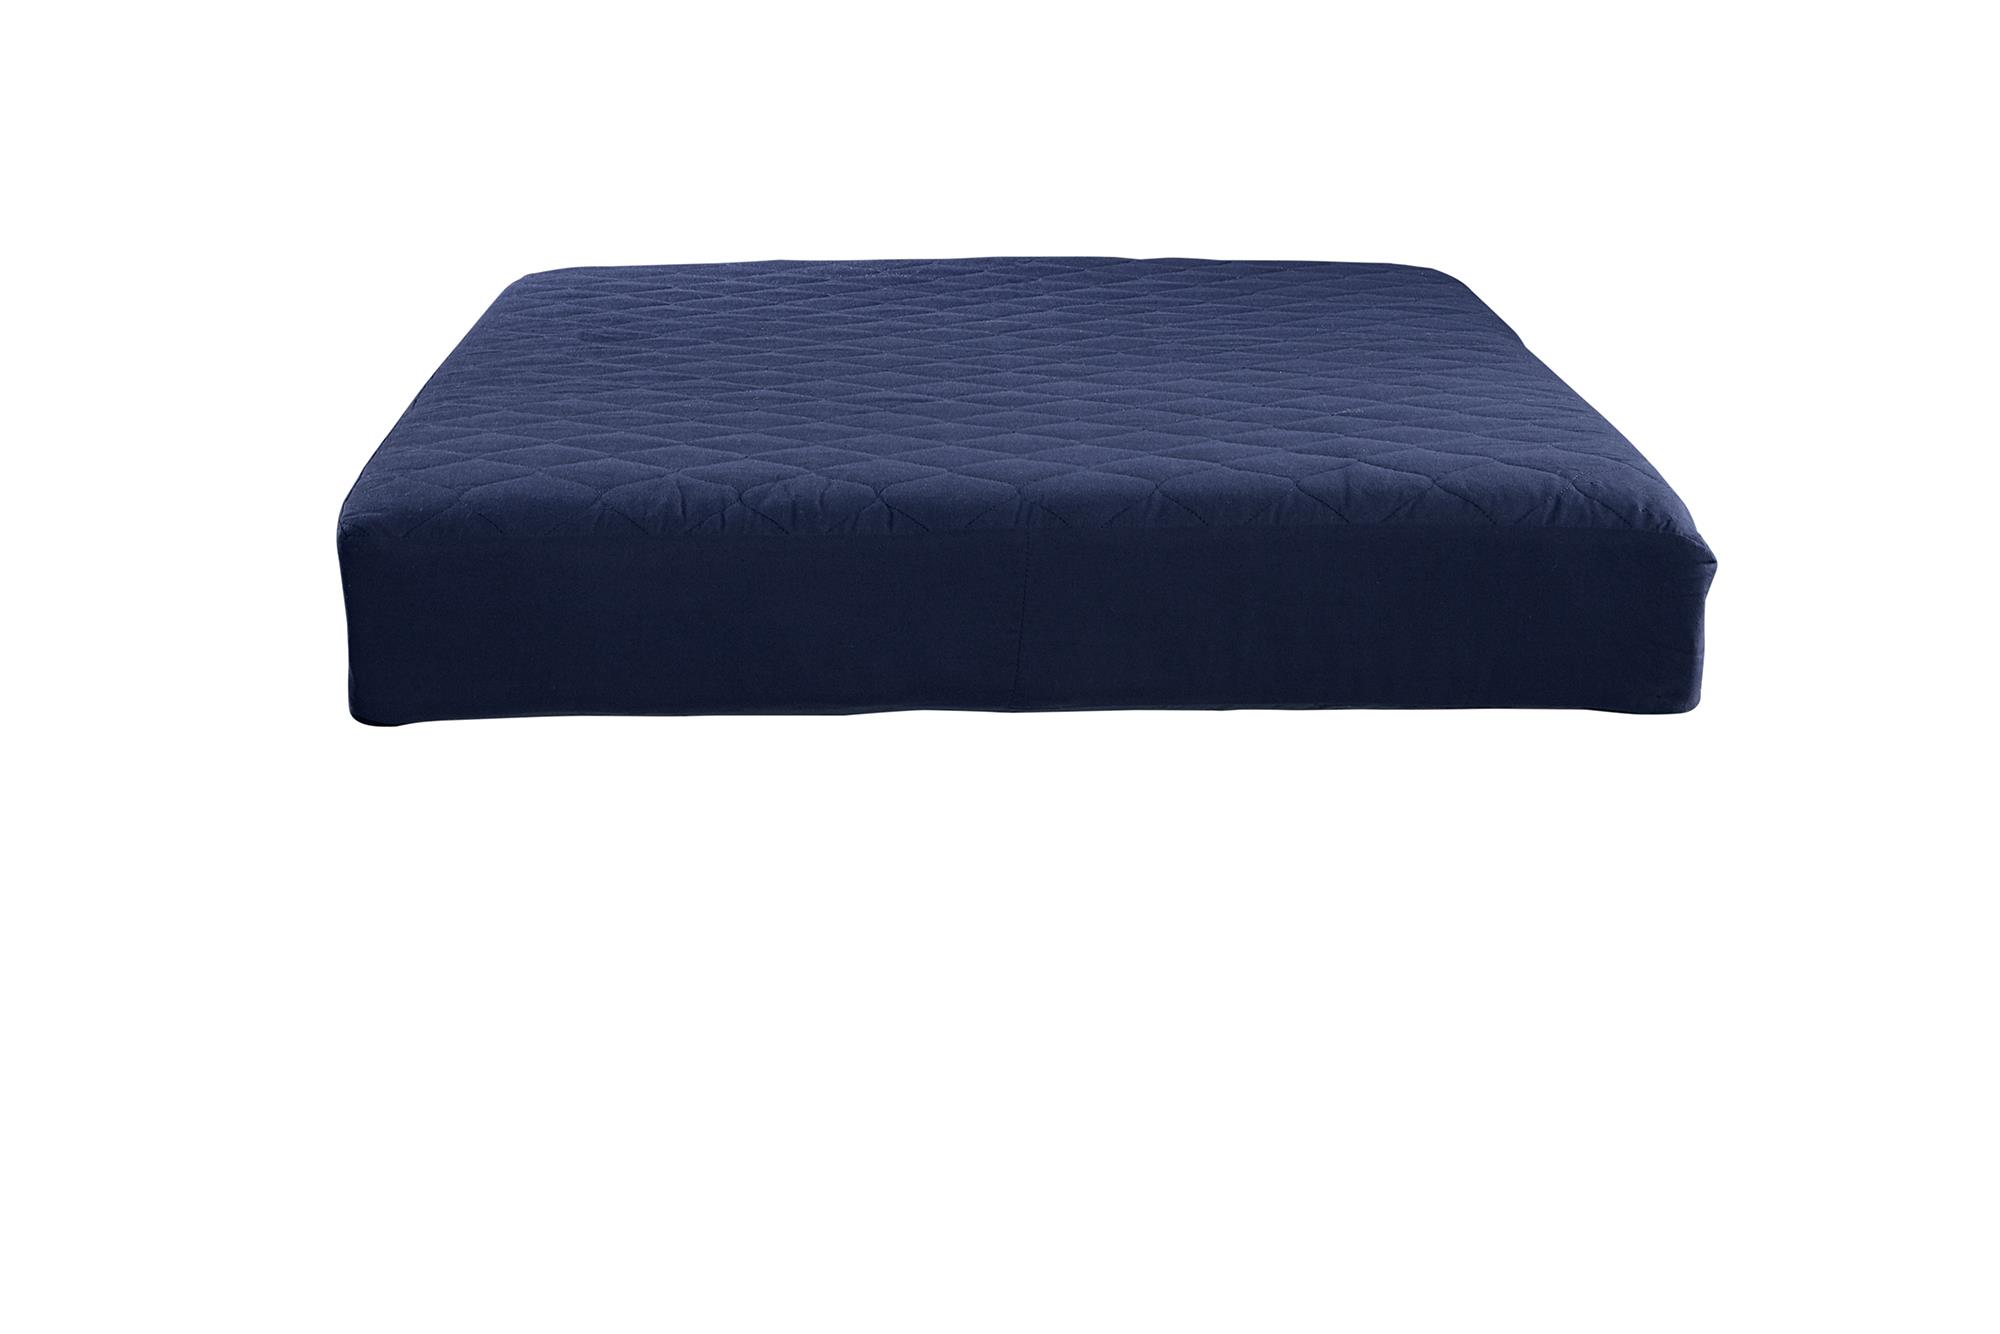 DHP Value 6 Inch Thermobonded Polyester Filled Quilted Top Bunk Bed Mattress, Twin, Navy - image 8 of 11